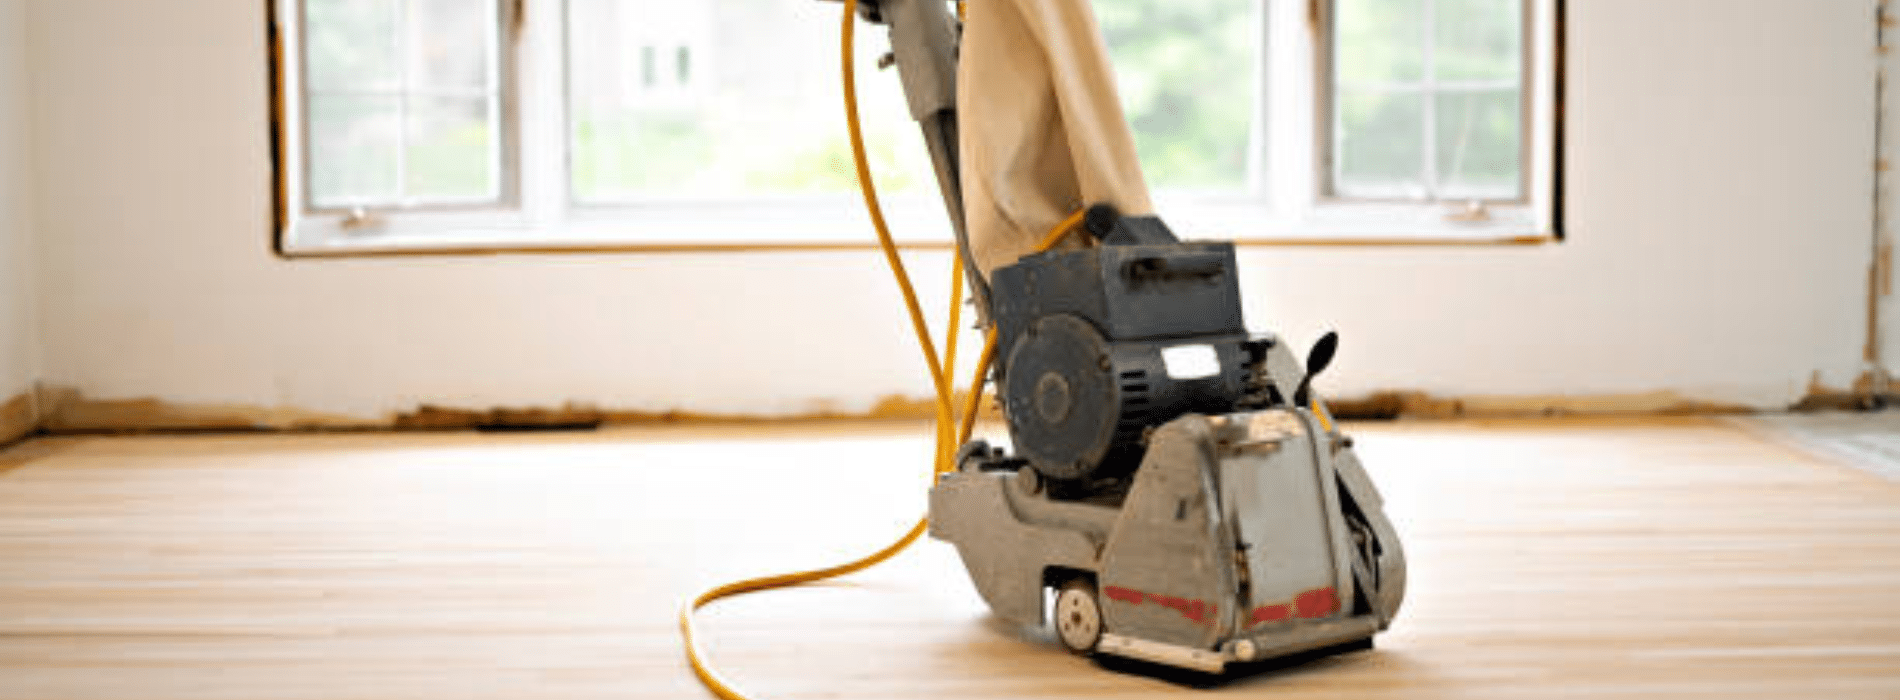 In Kennington, SE11, Mr Sander® use the Bona Belt UX sander (2.2 kW, 230V, 50 Hz) with a 200x750 mm size. Connect it to a dust extraction system with a HEPA filter for a clean and efficient sanding of parquet floors.